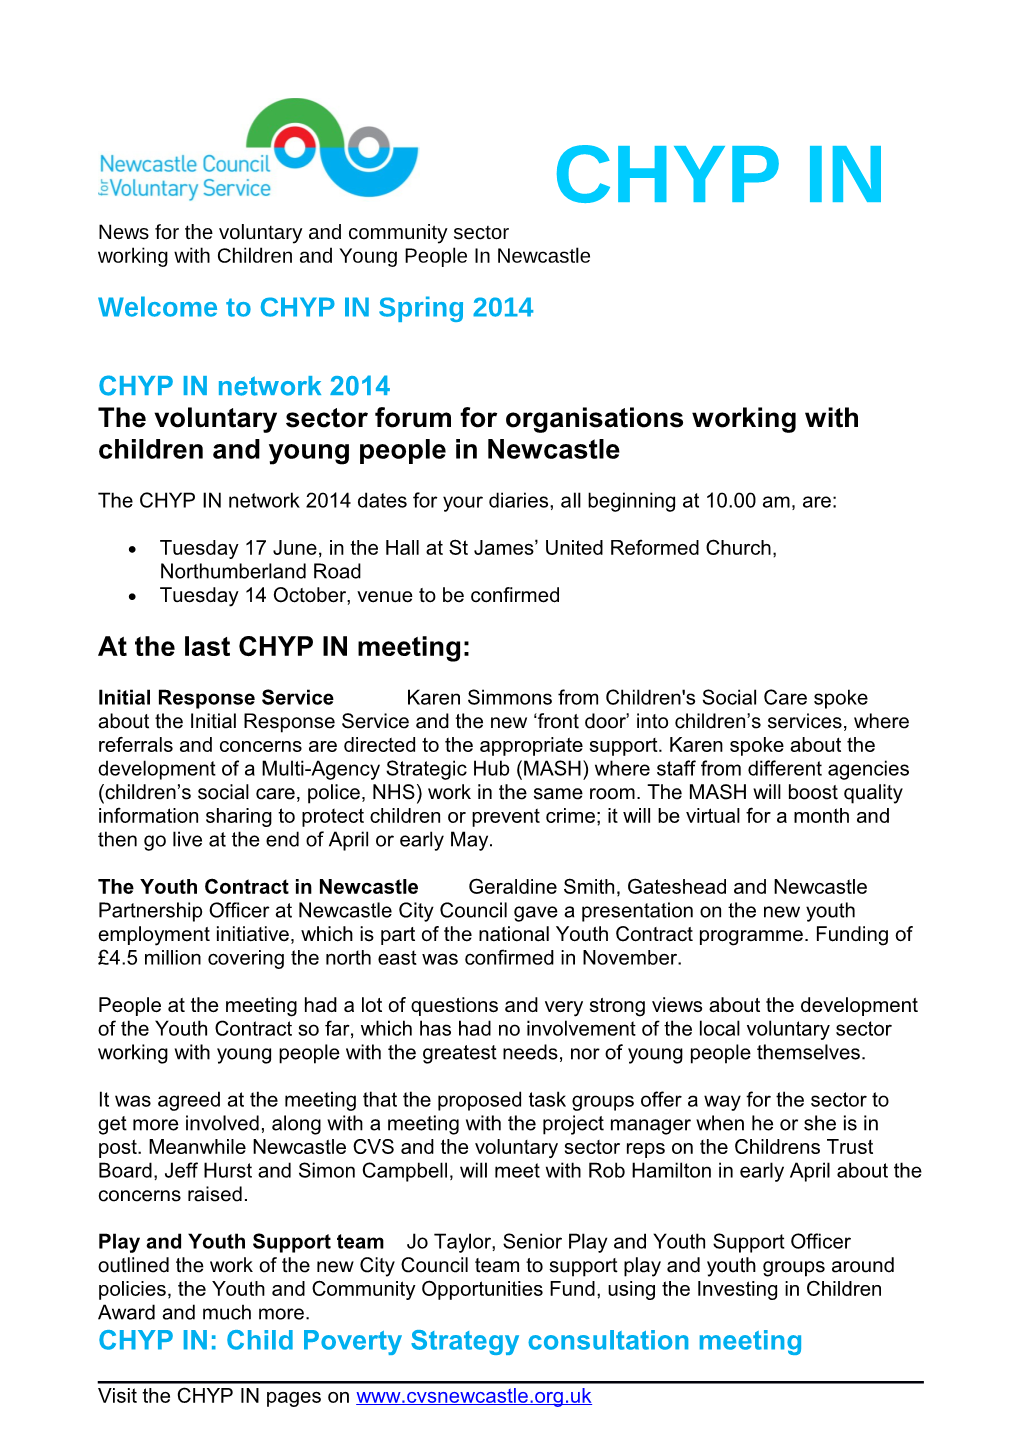 News for the Voluntary and Community Sector